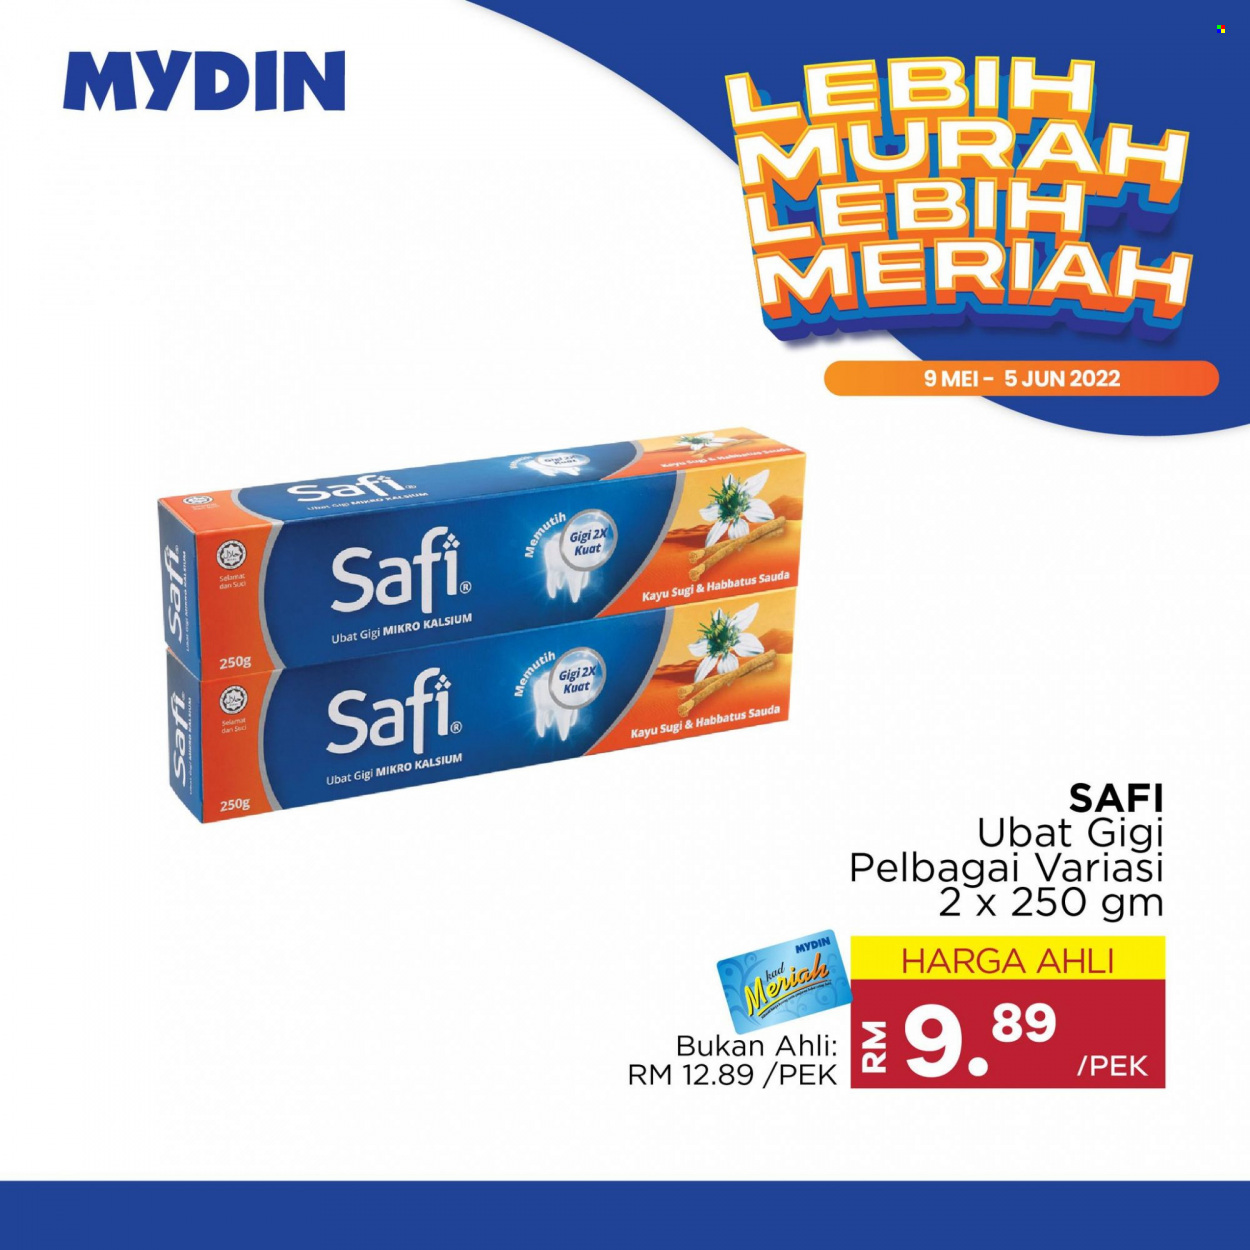 Mydin catalogue  - 09 May 2022 - 05 June 2022. Page 21.